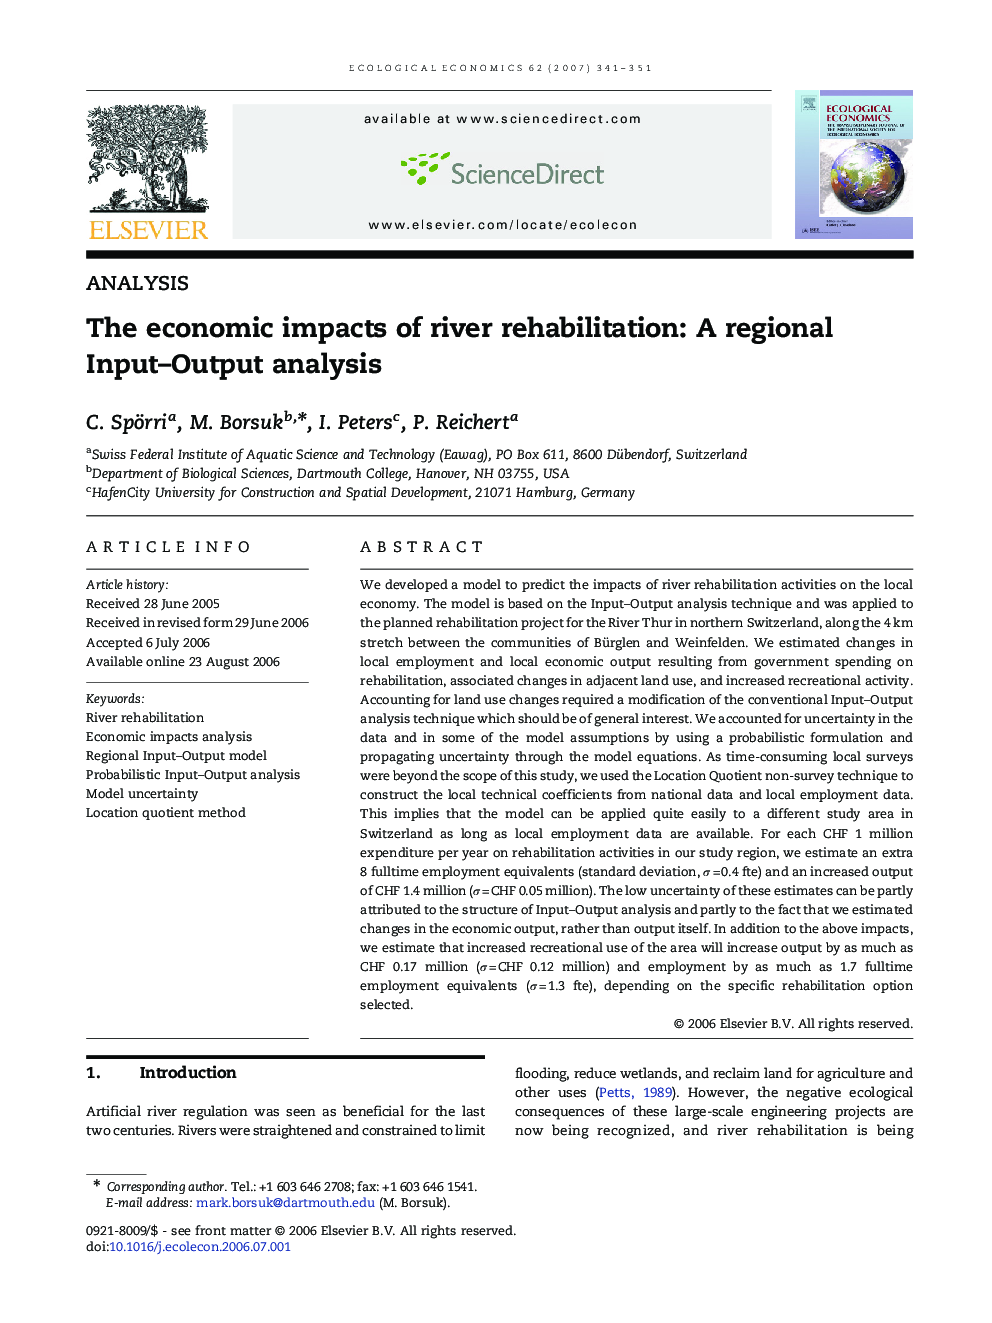 The economic impacts of river rehabilitation: A regional Input-Output analysis